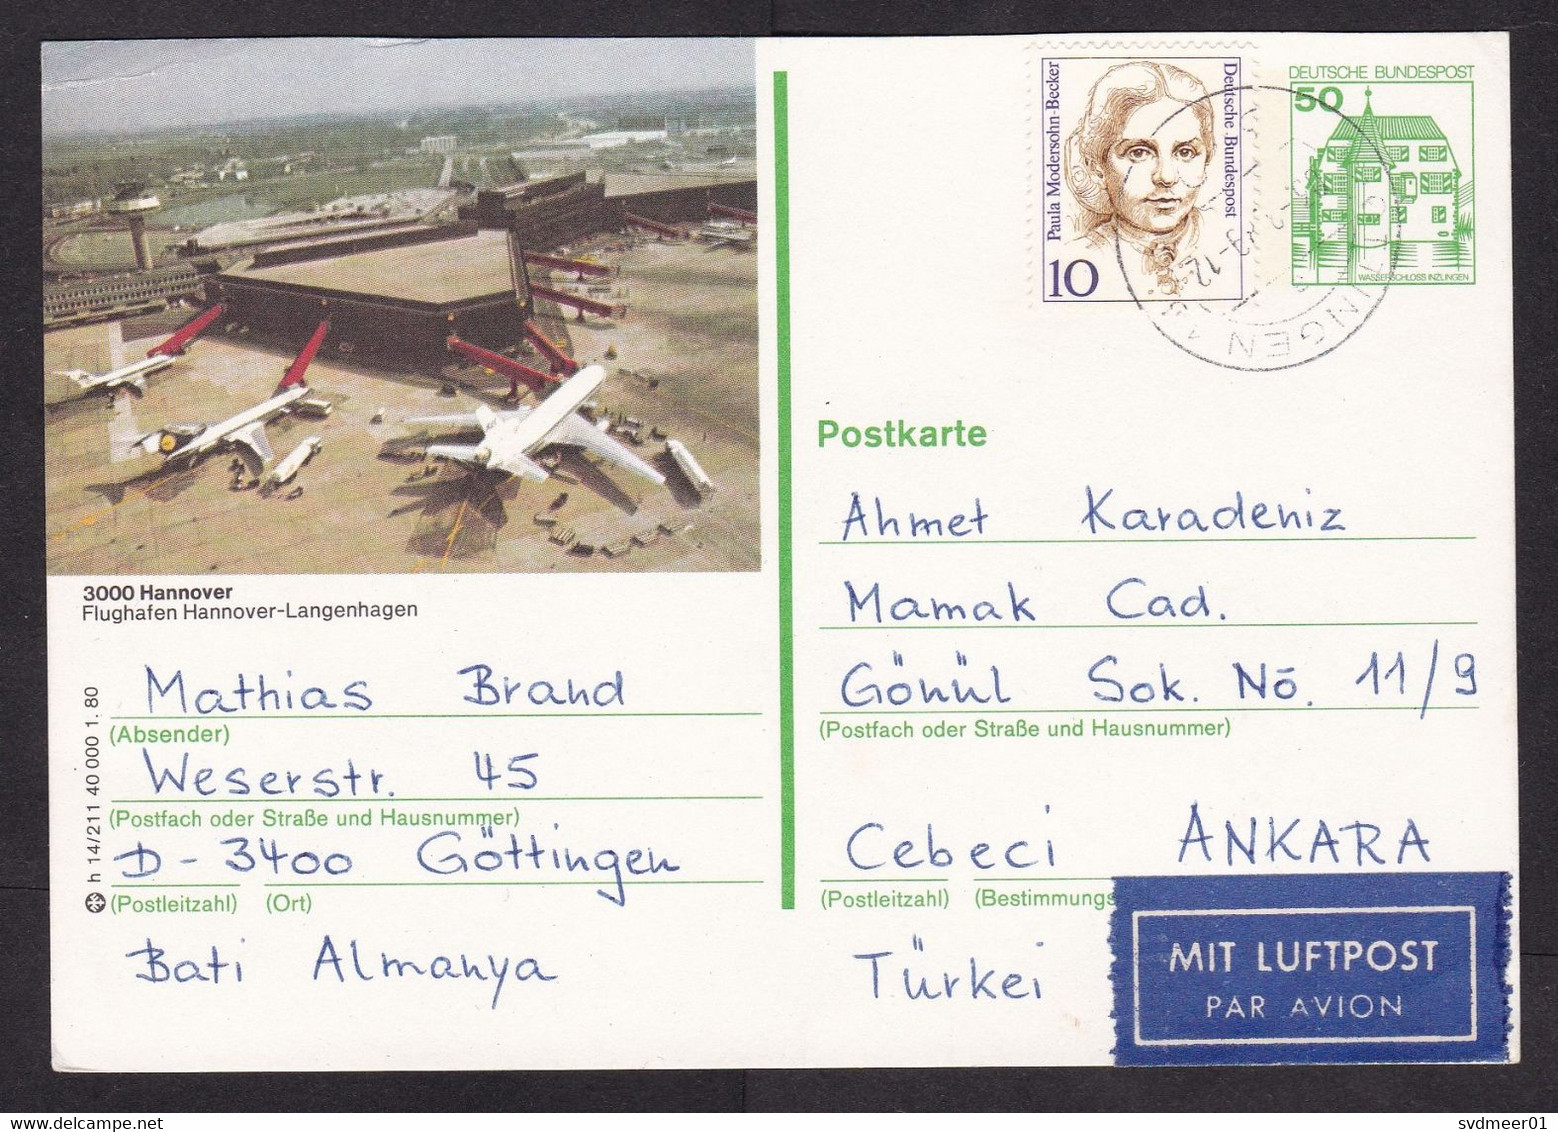 Germany: Stationery Postcard To Turkey 1989, Extra Stamp, Airport Hannover, Airplane Aviation, Air Label (traces Of Use) - Briefe U. Dokumente